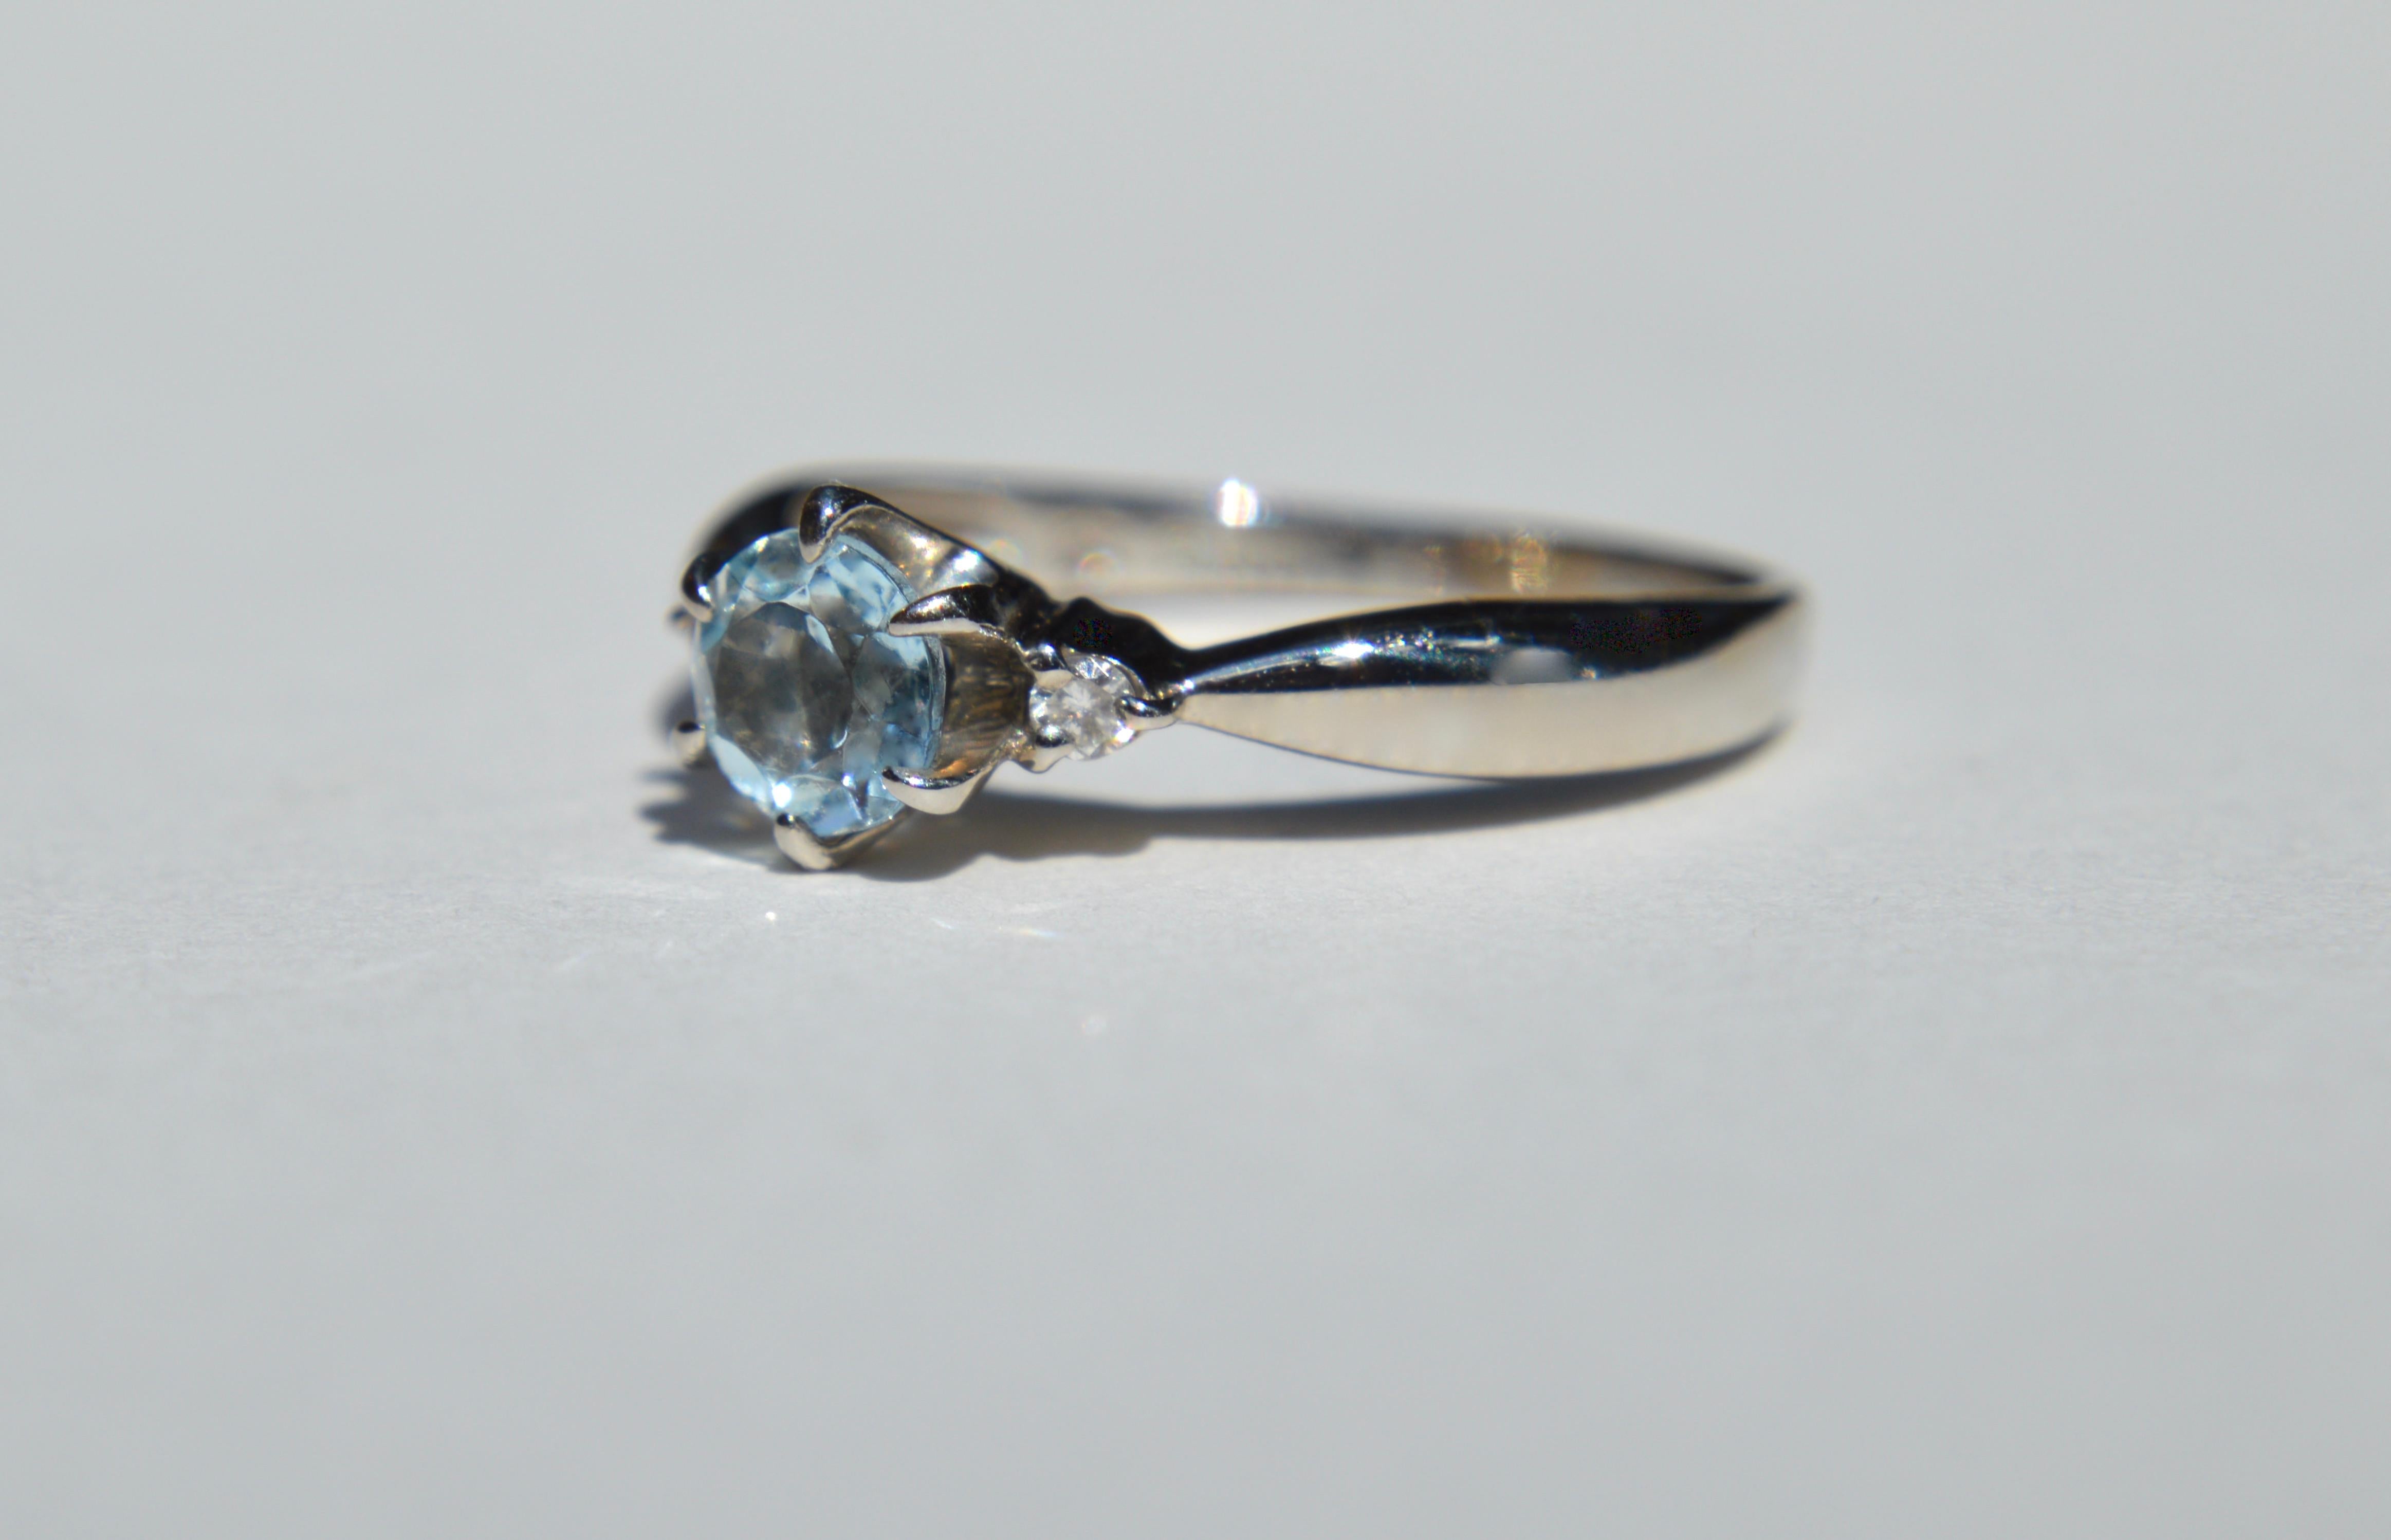 Vintage c1980s .46 carat round cut natural aquamarine with two .03 carat round cut diamonds set in solid platinum. In excellent condition. Size 6, can easily be resized by your local jeweler. Marked as Pt900 for platinum. The beautiful aquamarine